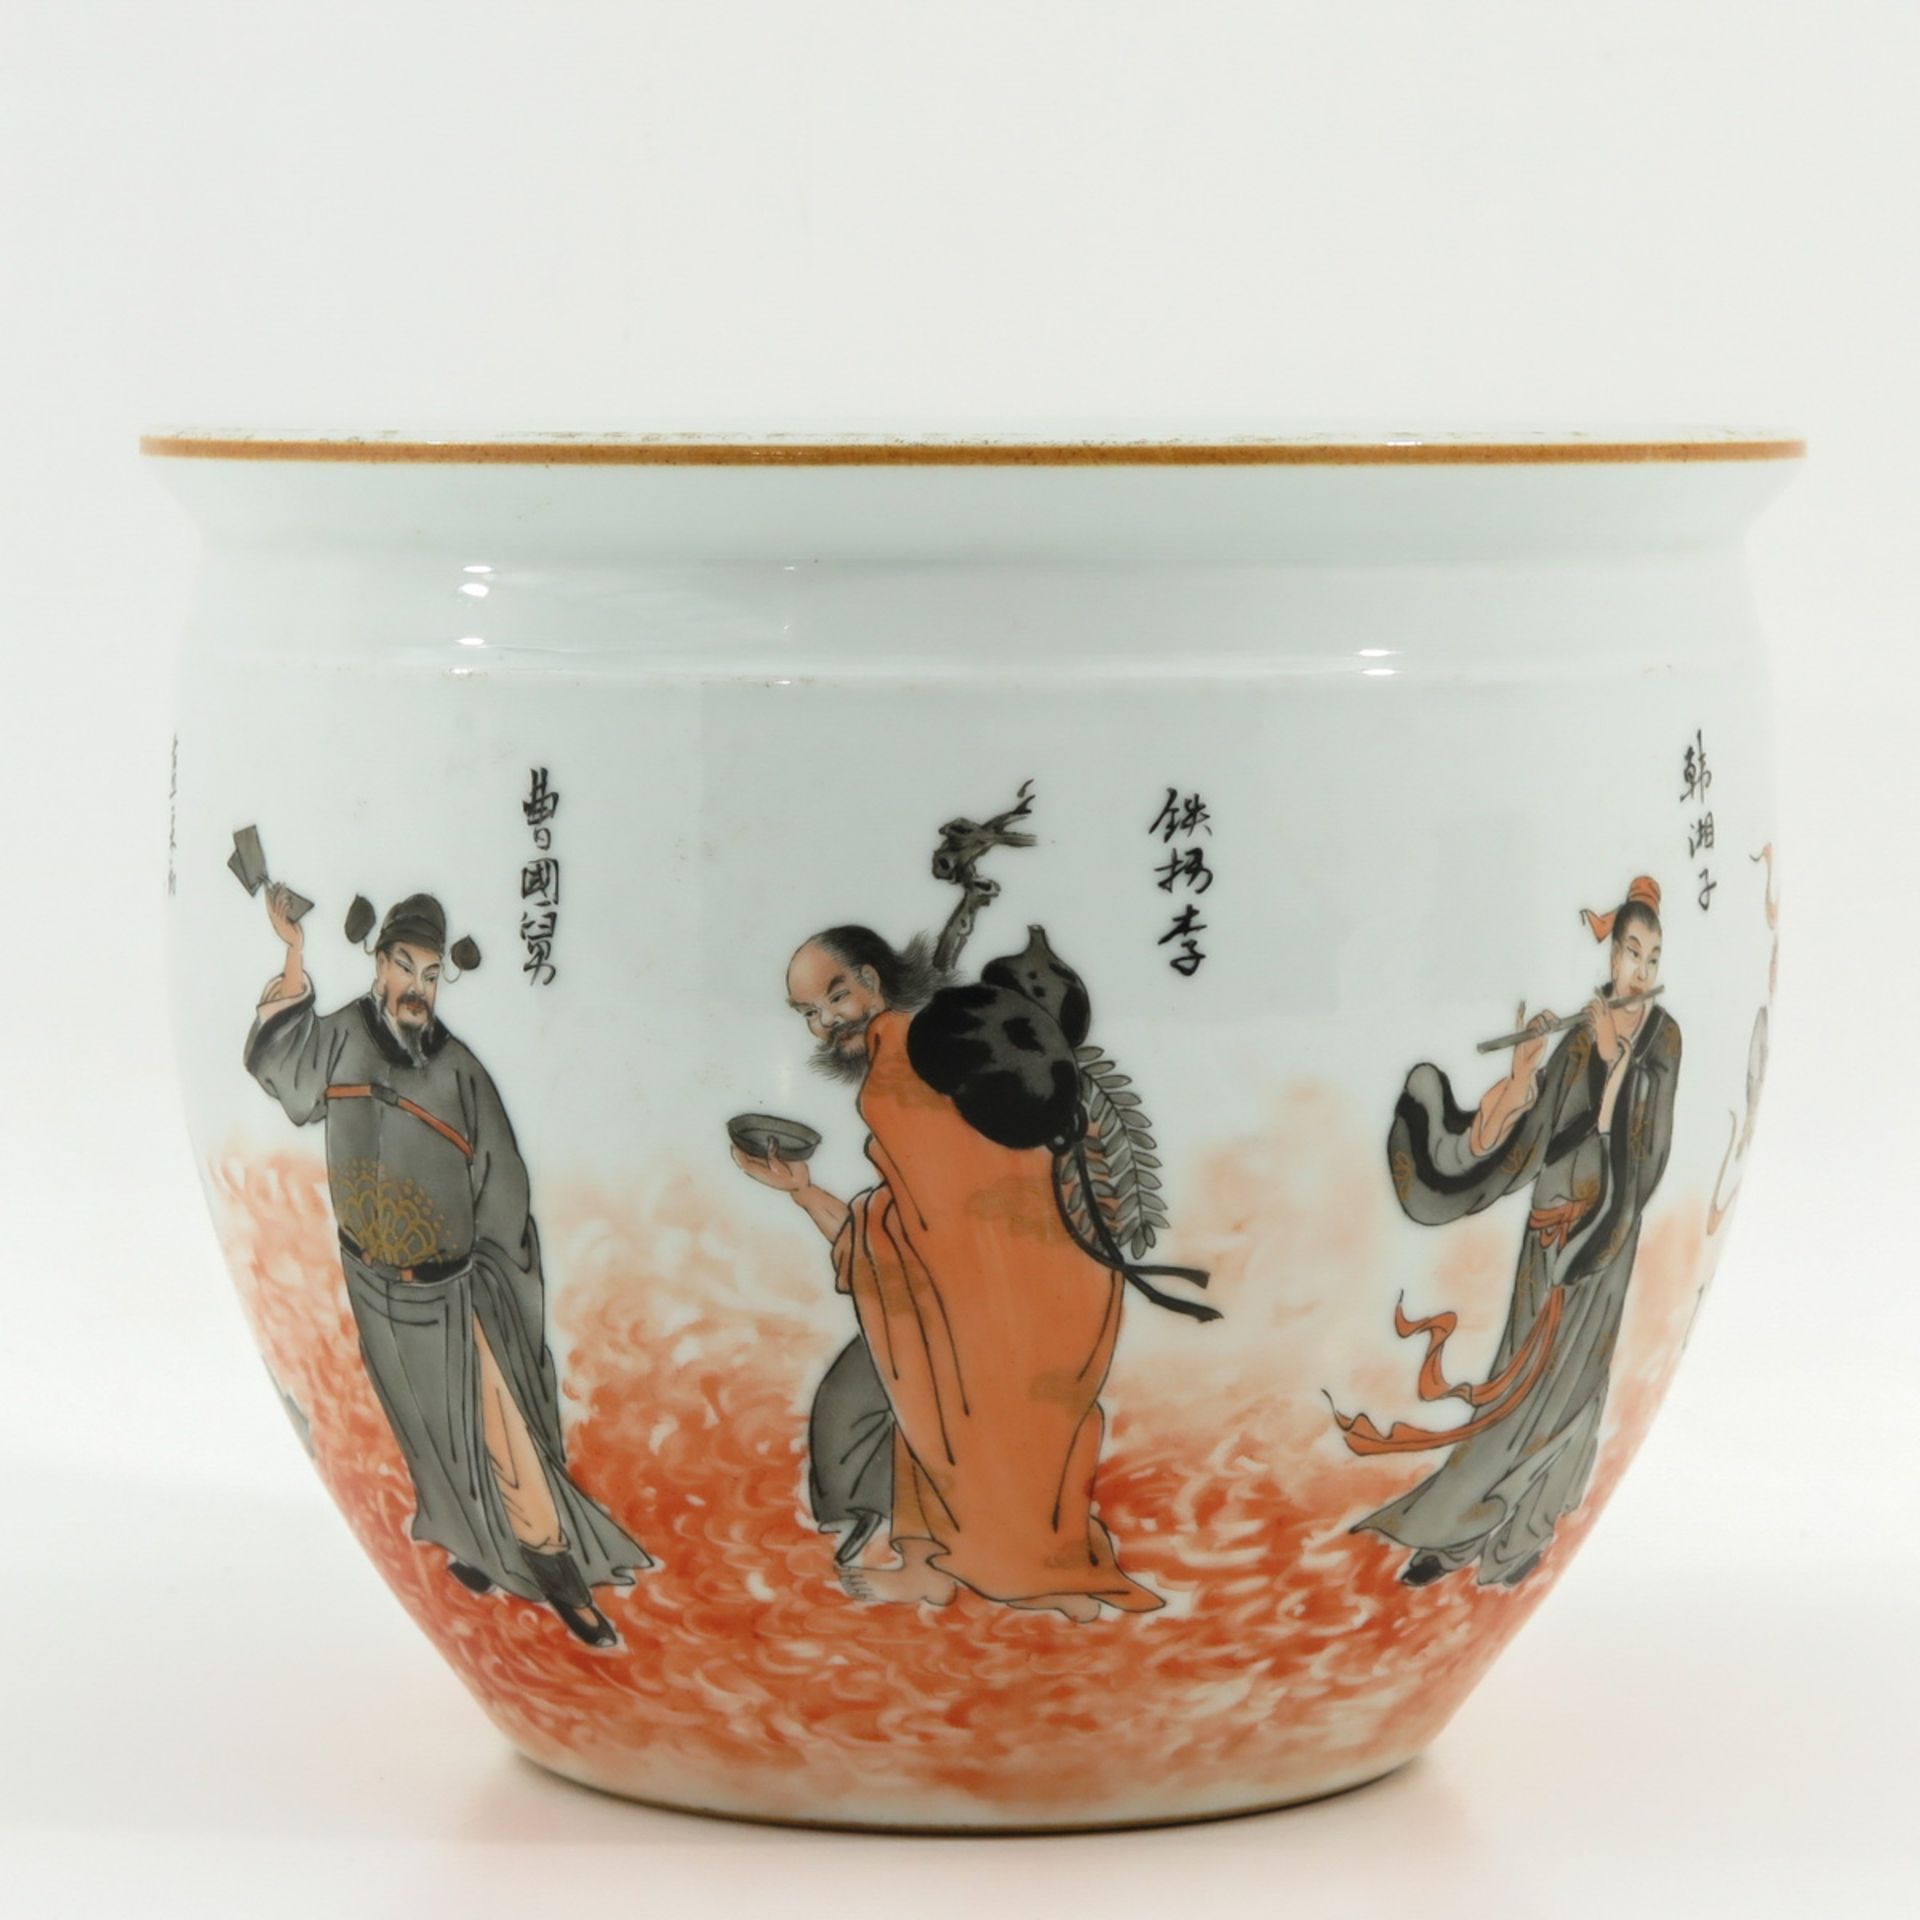 A Polyhchrome Decor Fish Bowl - Image 2 of 10